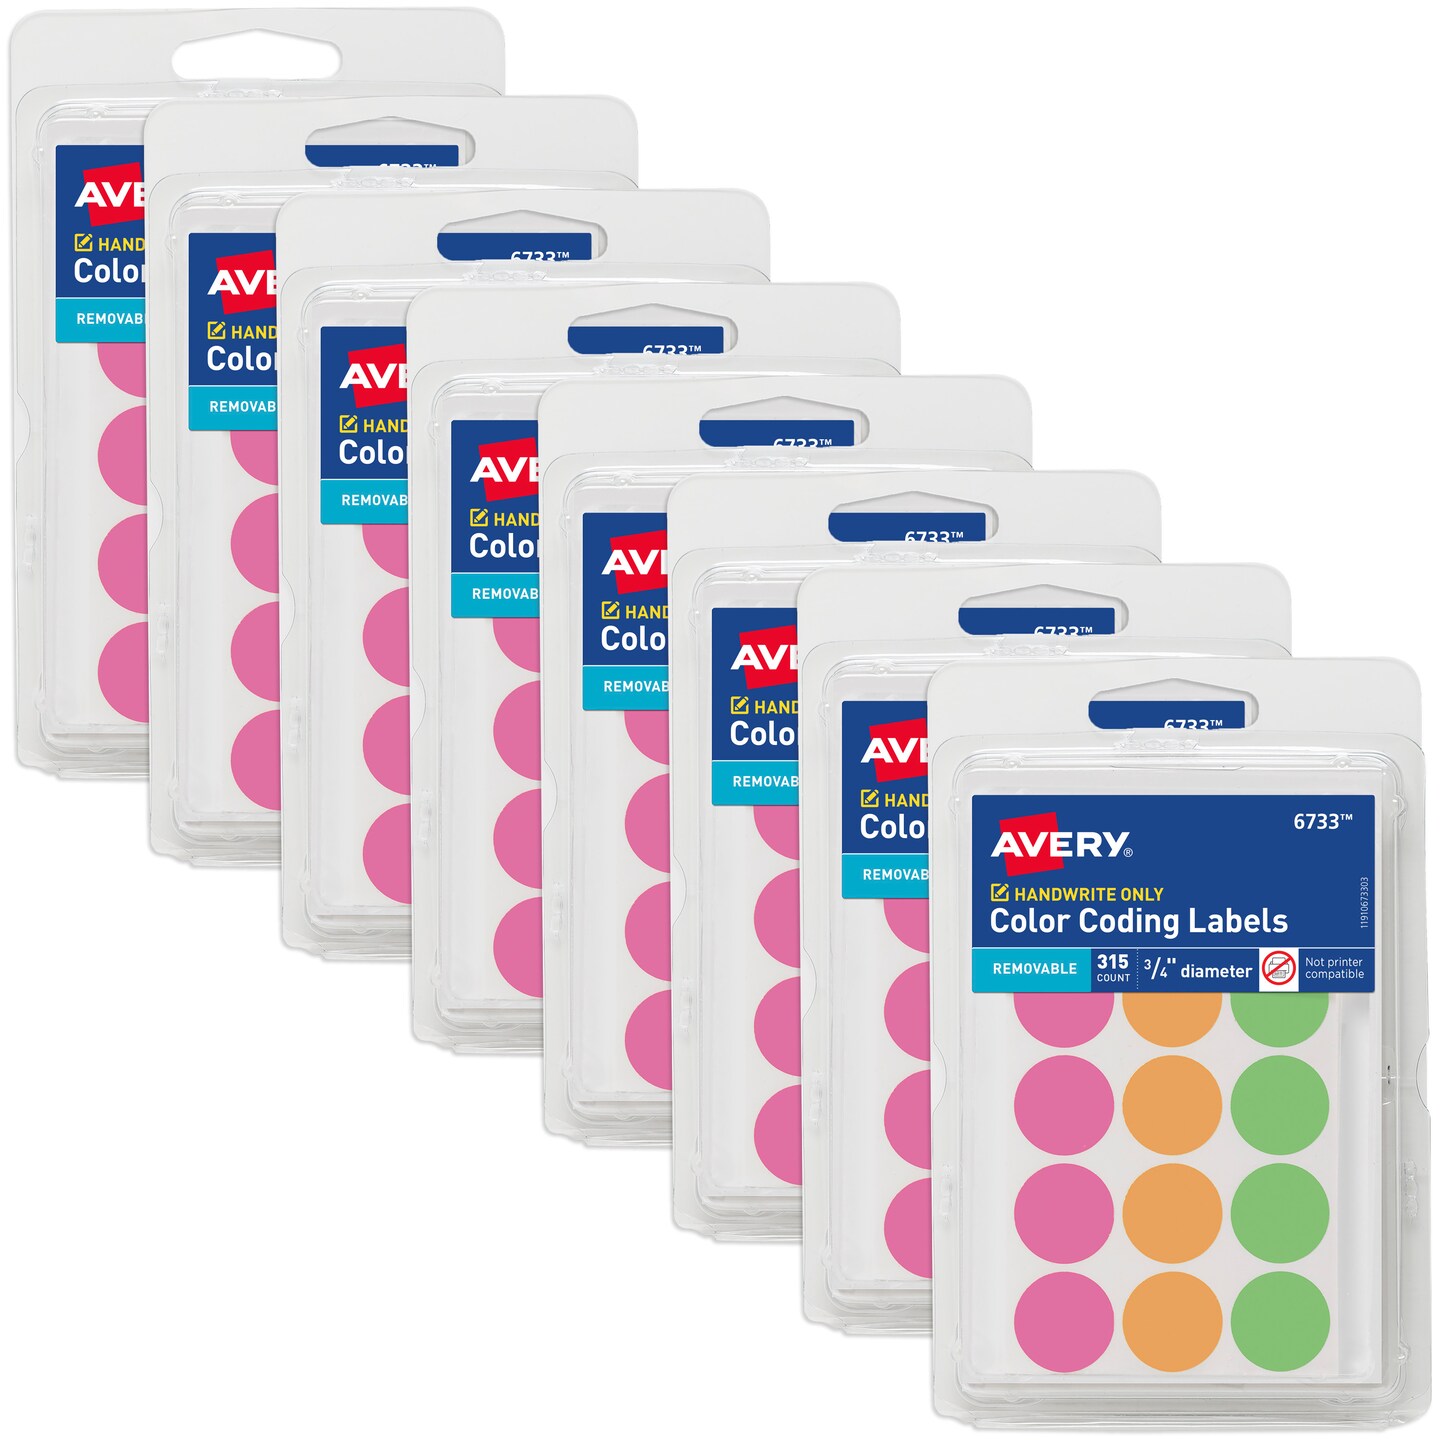 Avery Color-Coding Removable Labels, 3/4 Inch Round Labels, Assorted Neon Colors, Non-Printable, 8 Packs, 2,520 Dot Stickers Total (21933)